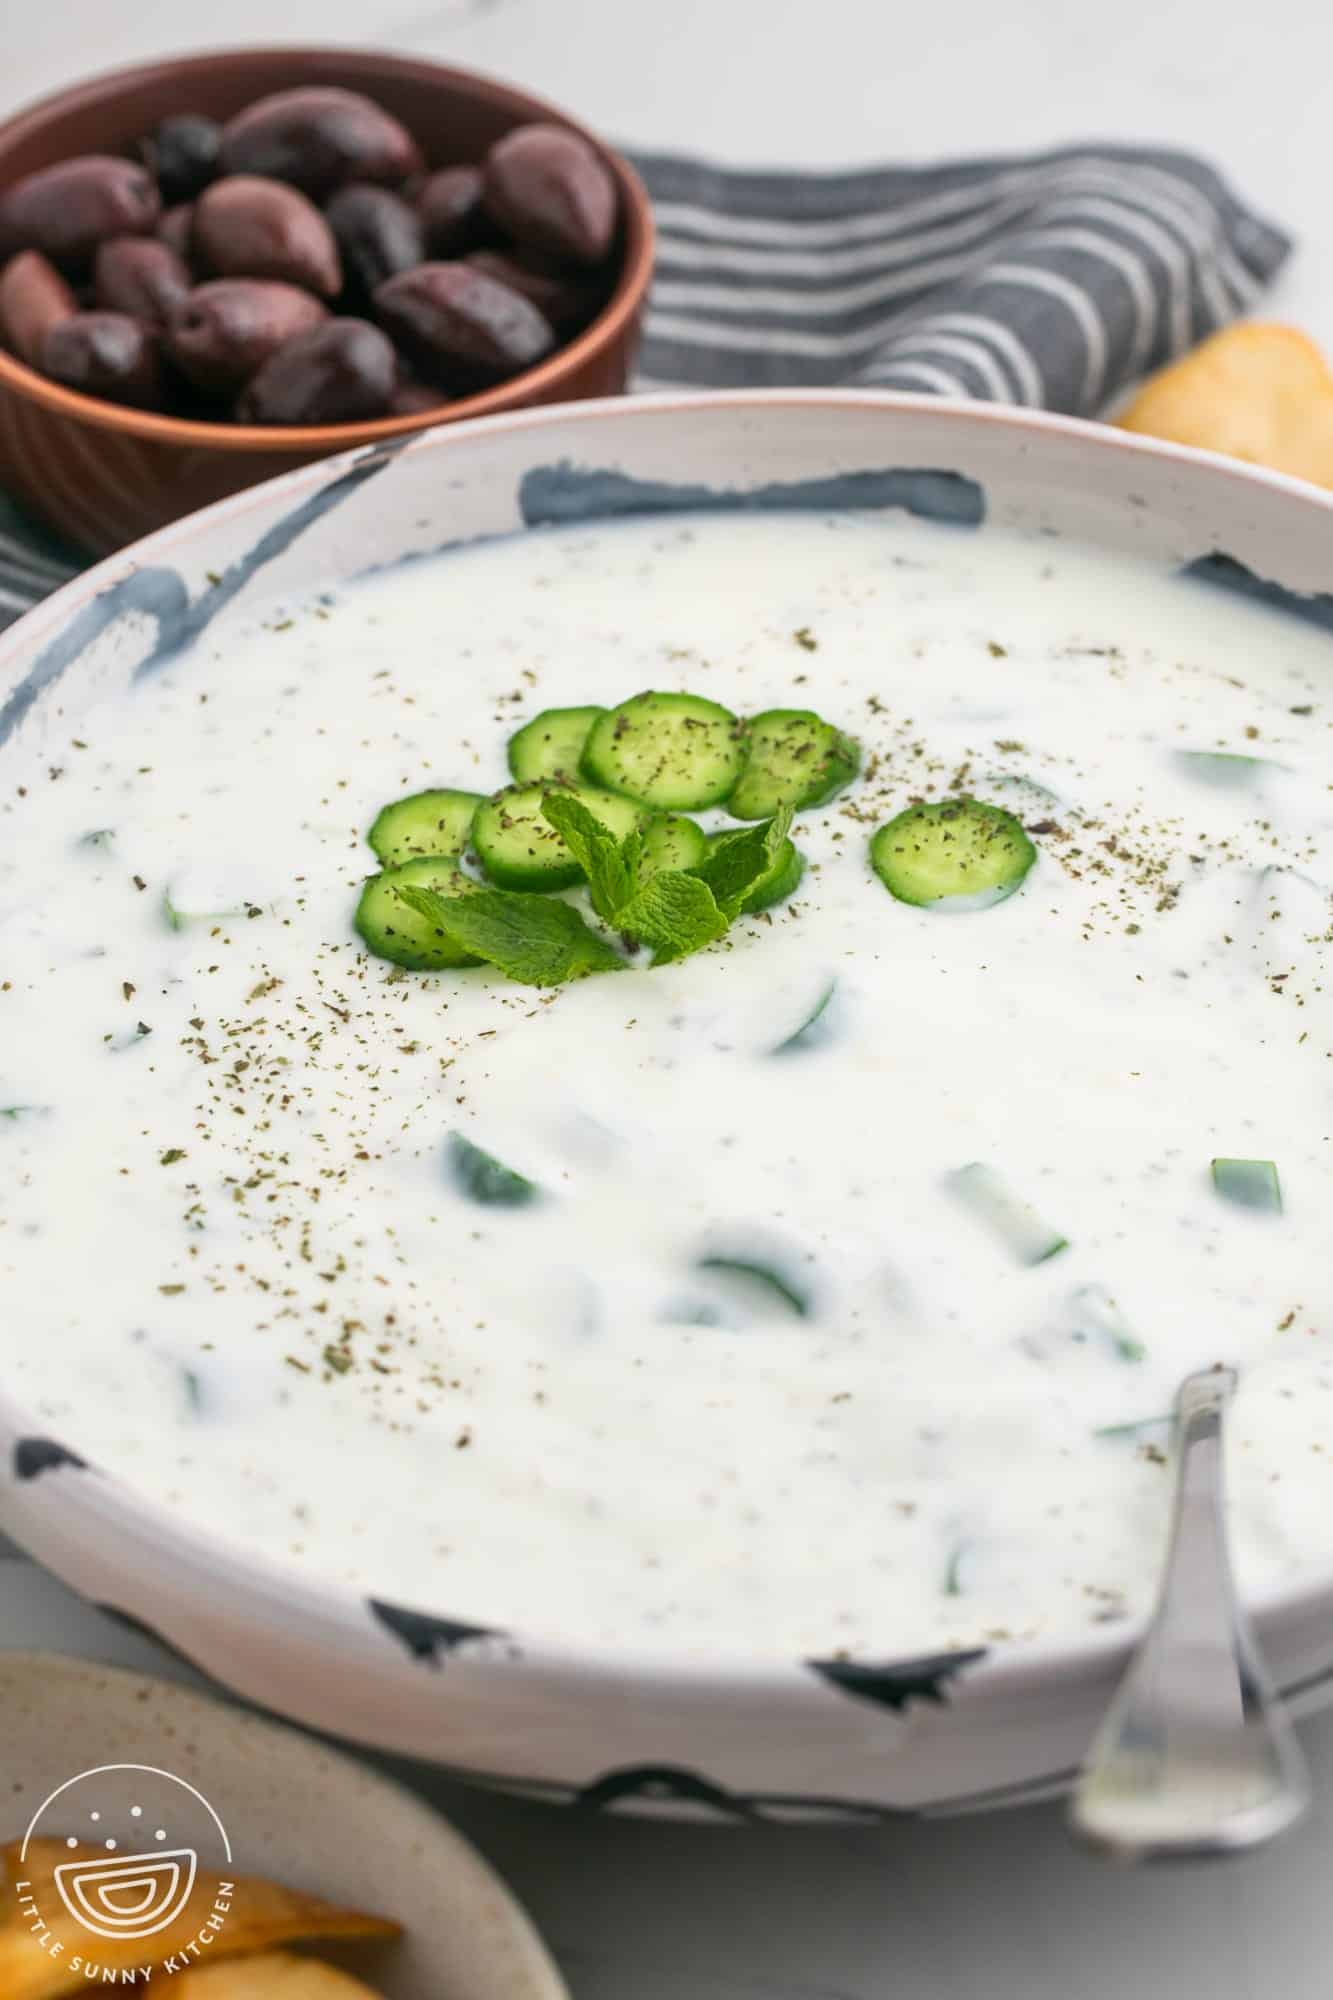 Cucumber yogurt sauce in a large bowl, with sliced of cucumber and dried mint, and a serving spoon. Kalamata olives in the background.